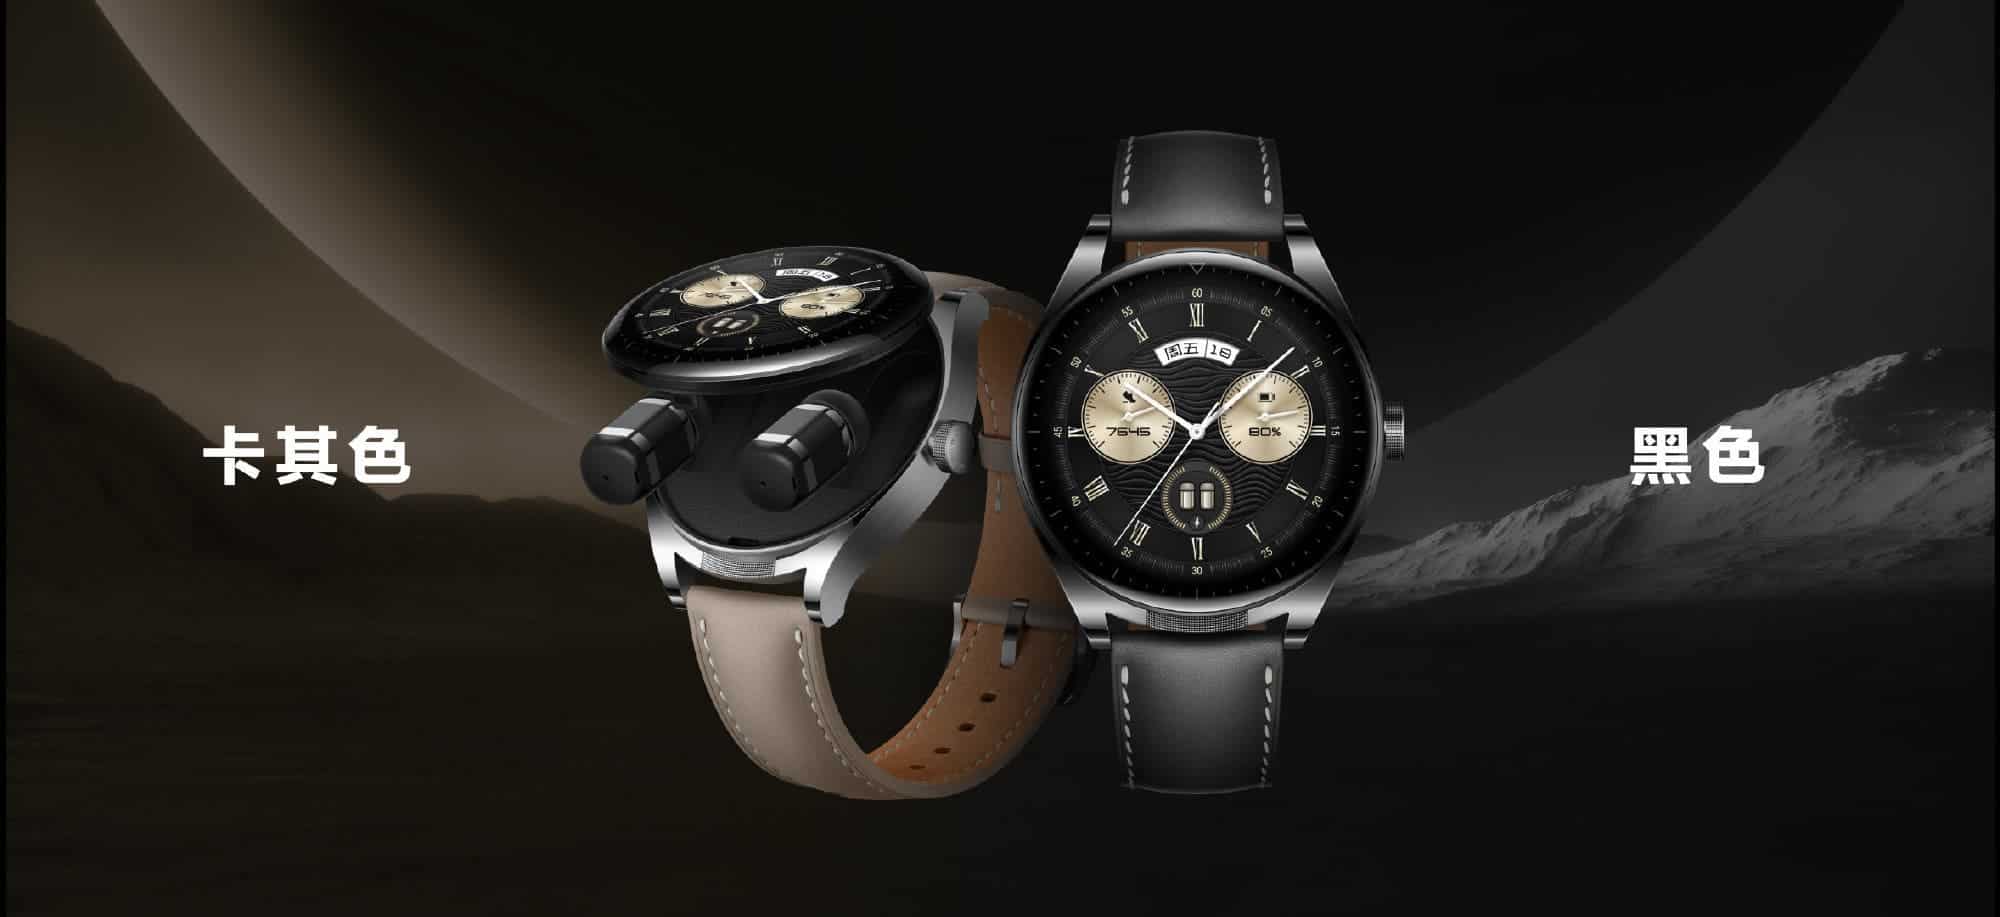 Huawei WATCH Buds With Innovative 2-In-1 Design Released